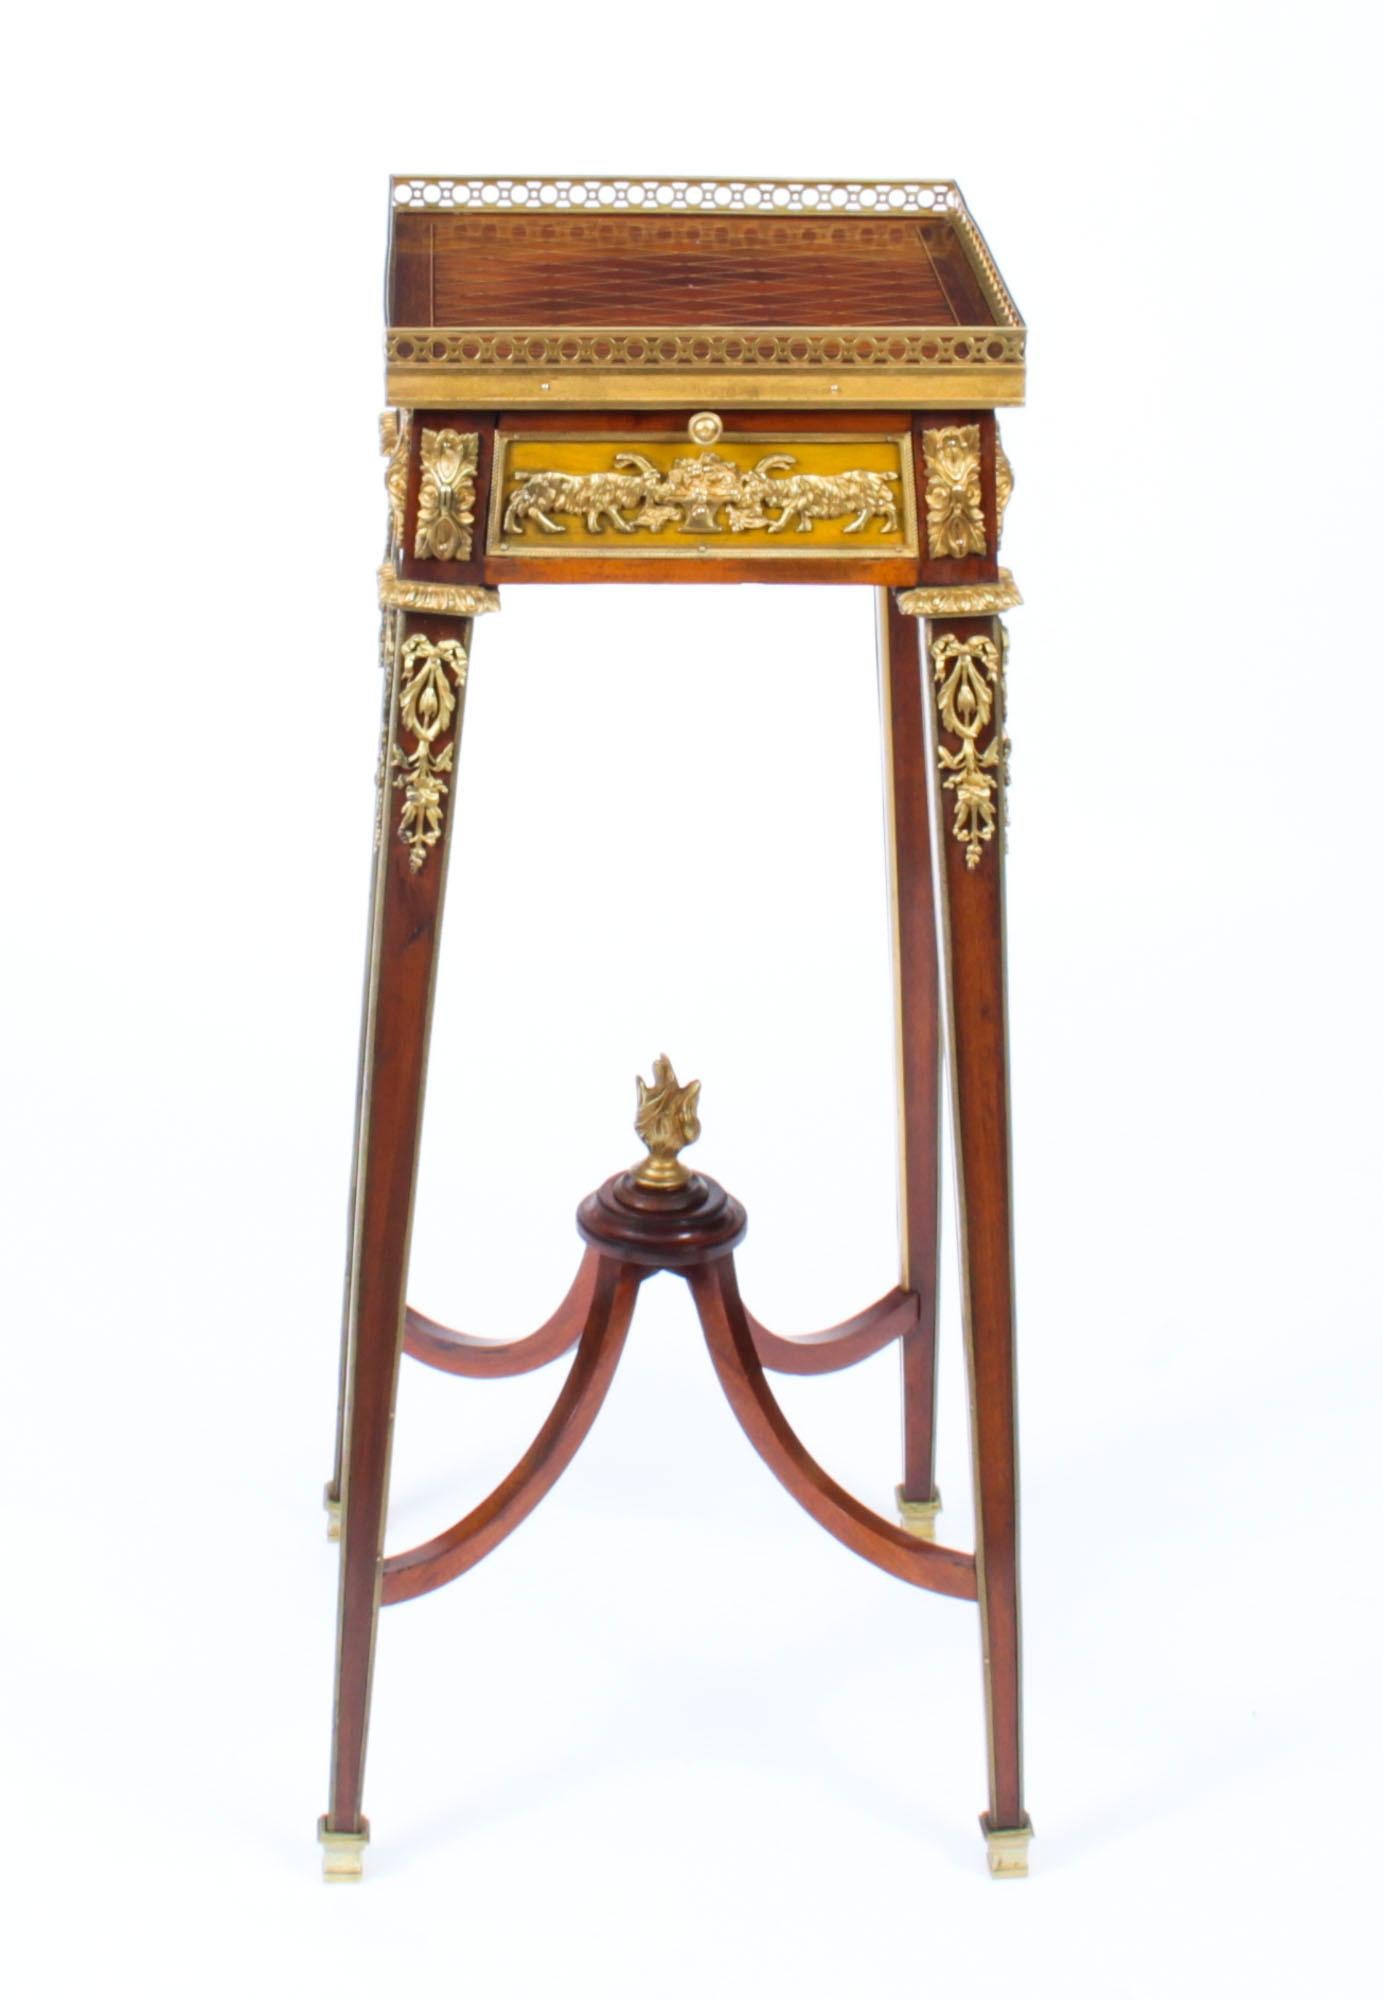 This is a fine antique French ormolu mounted mahogany and specimen wood parquetry stand firmly attributed to François Linke, Circa 1890 in date.

The square galleried top features beautiful parquetry decoration with ebony and box-wood stringing. The